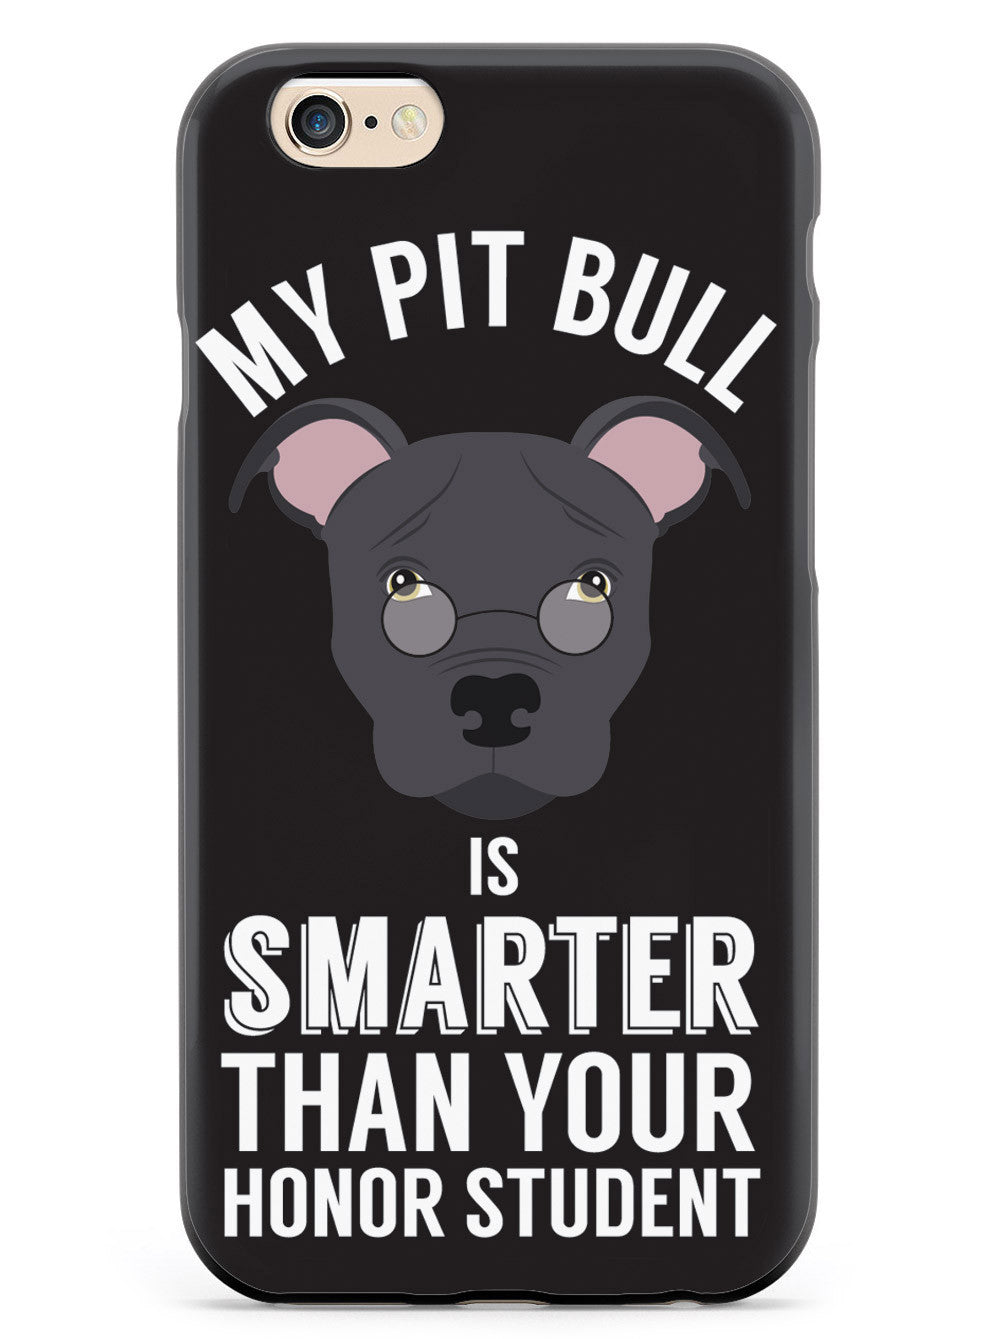 Smarter Than Your Honor Student - Pitbull Case